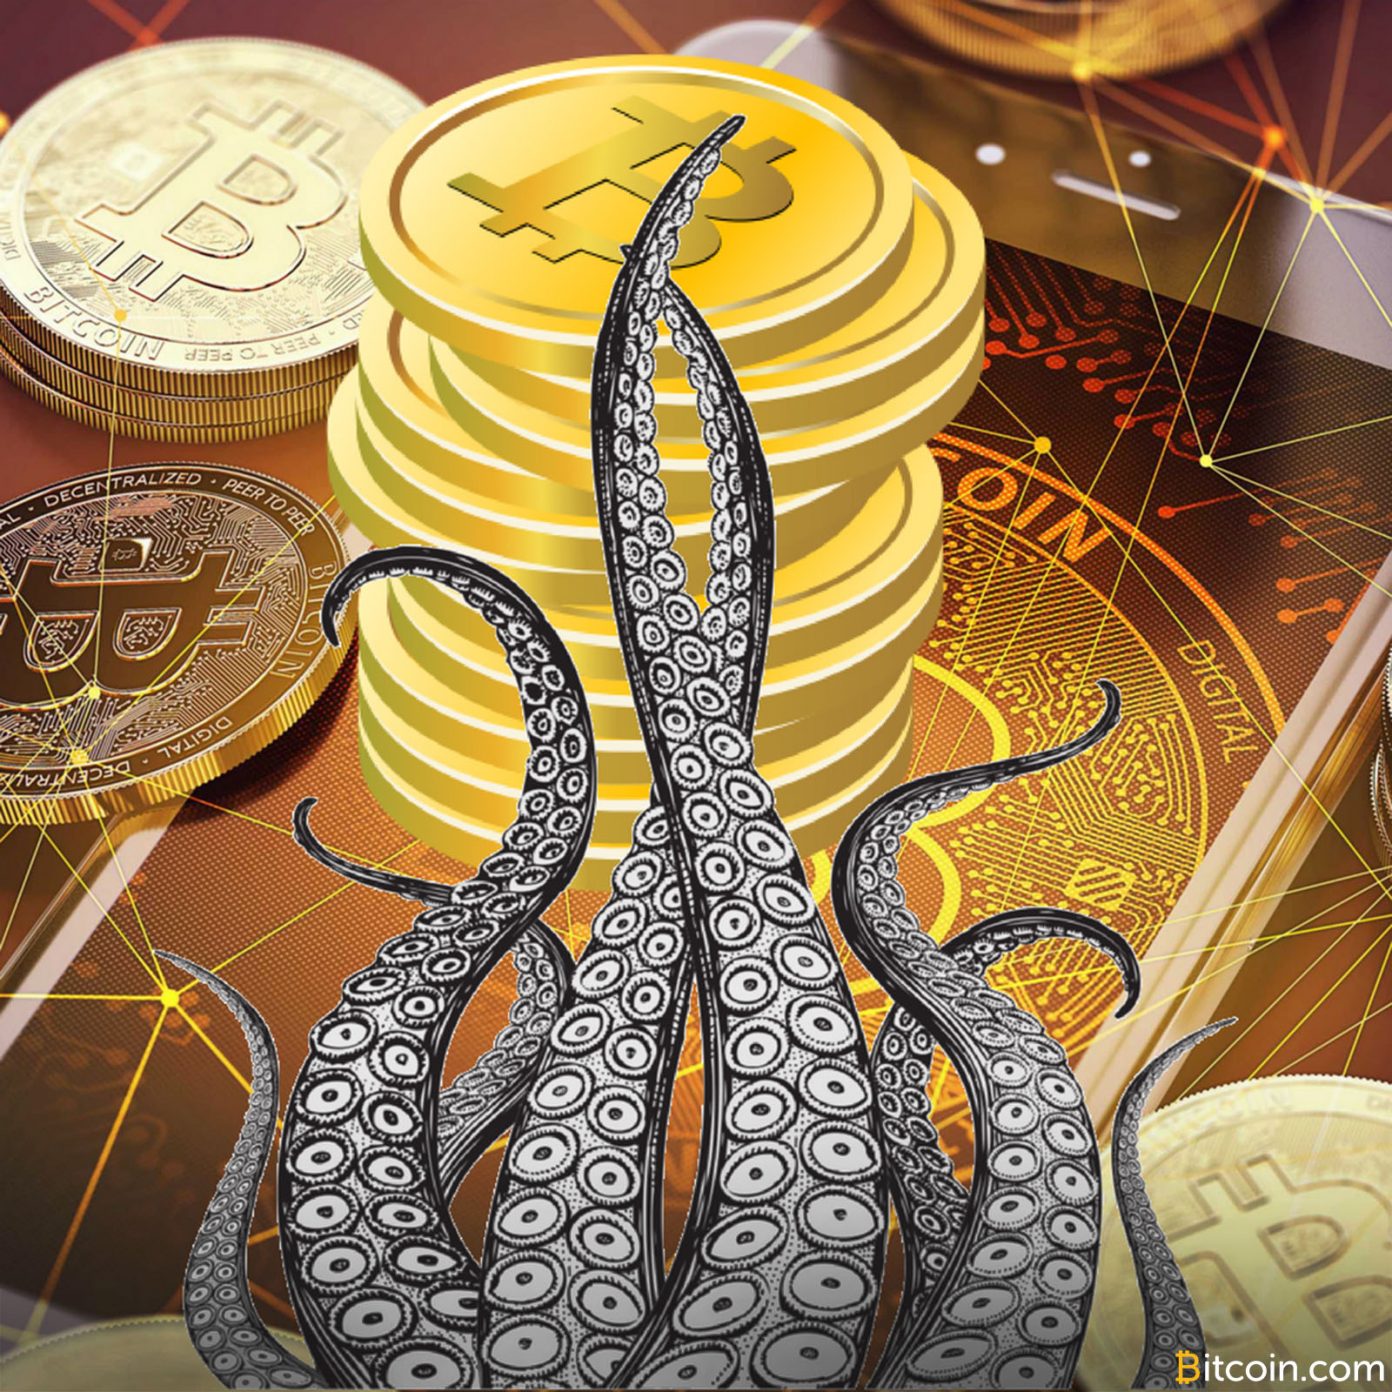 Kraken CEO Apologizes for Site Issues as Bitcoin Exchanges ...